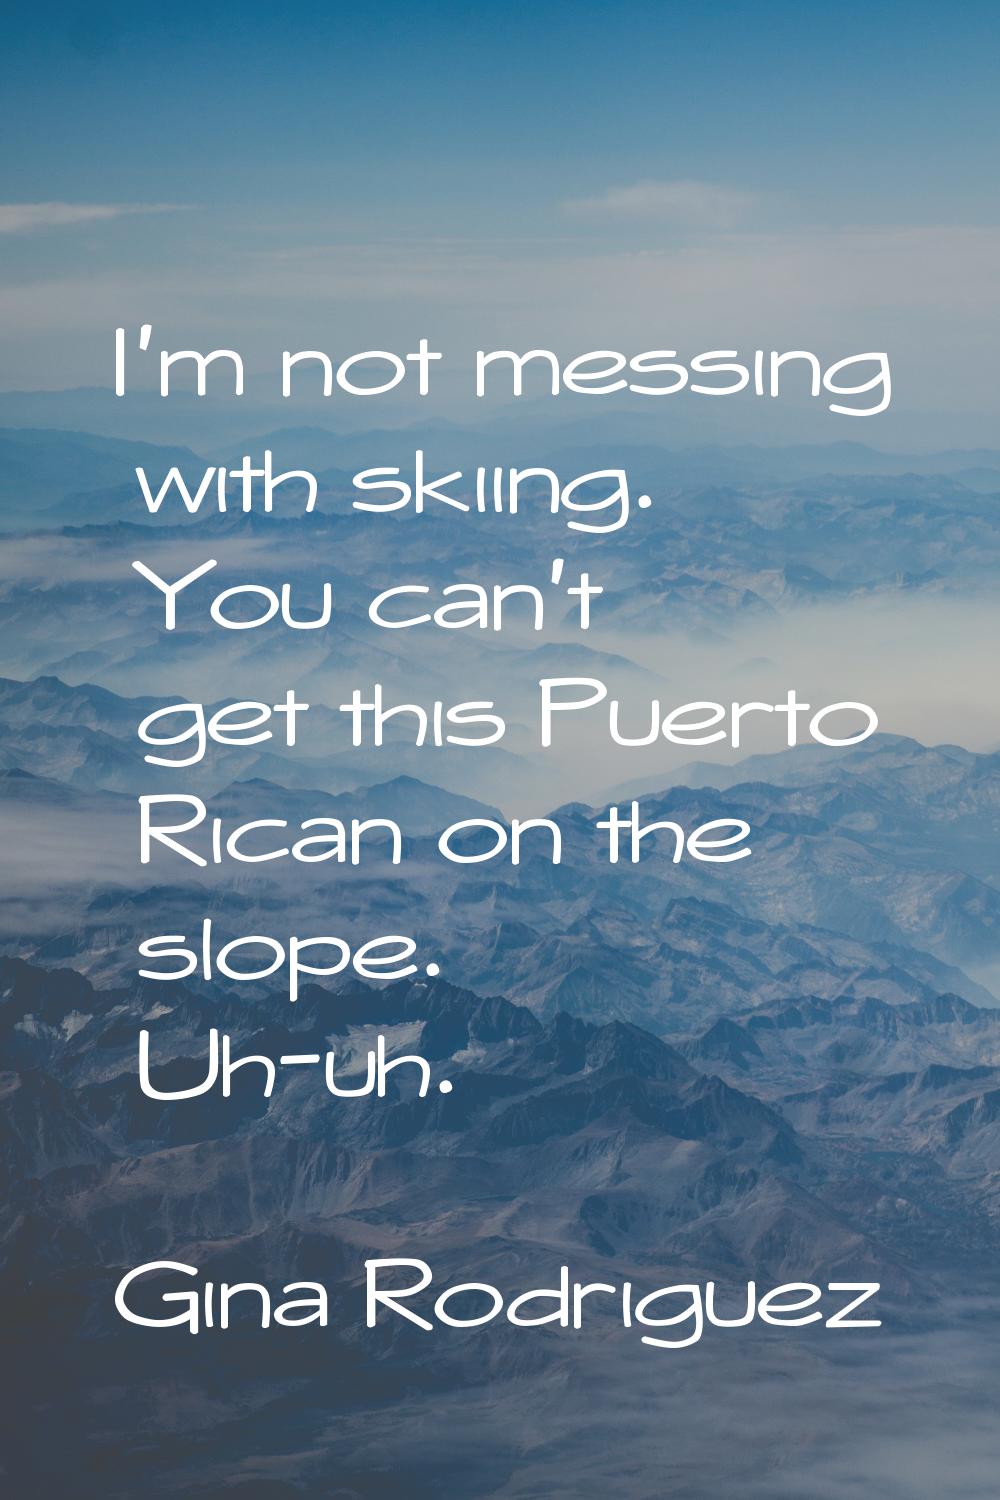 I'm not messing with skiing. You can't get this Puerto Rican on the slope. Uh-uh.